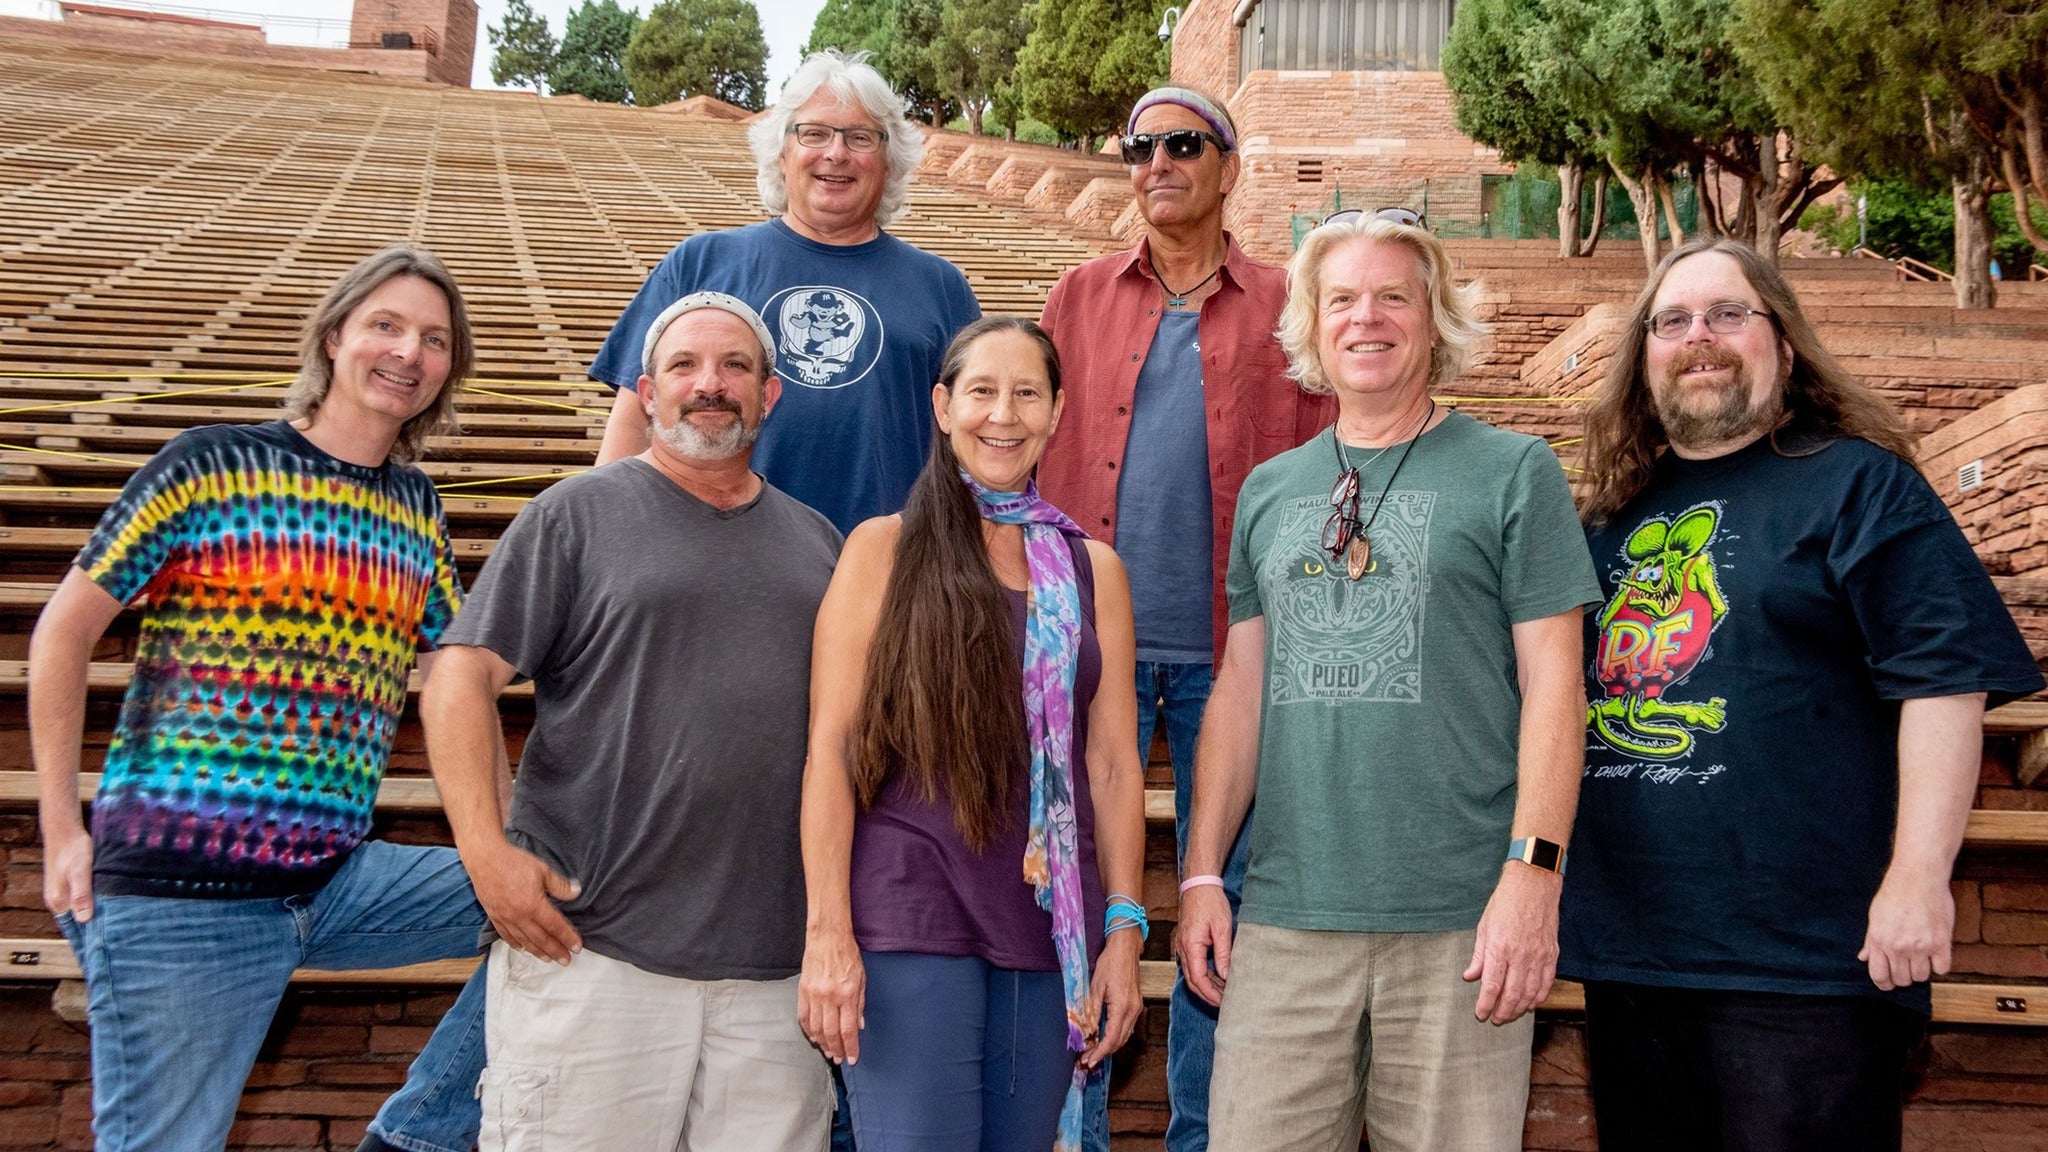 Dark Star Orchestra - Two Day Pass at State Theatre